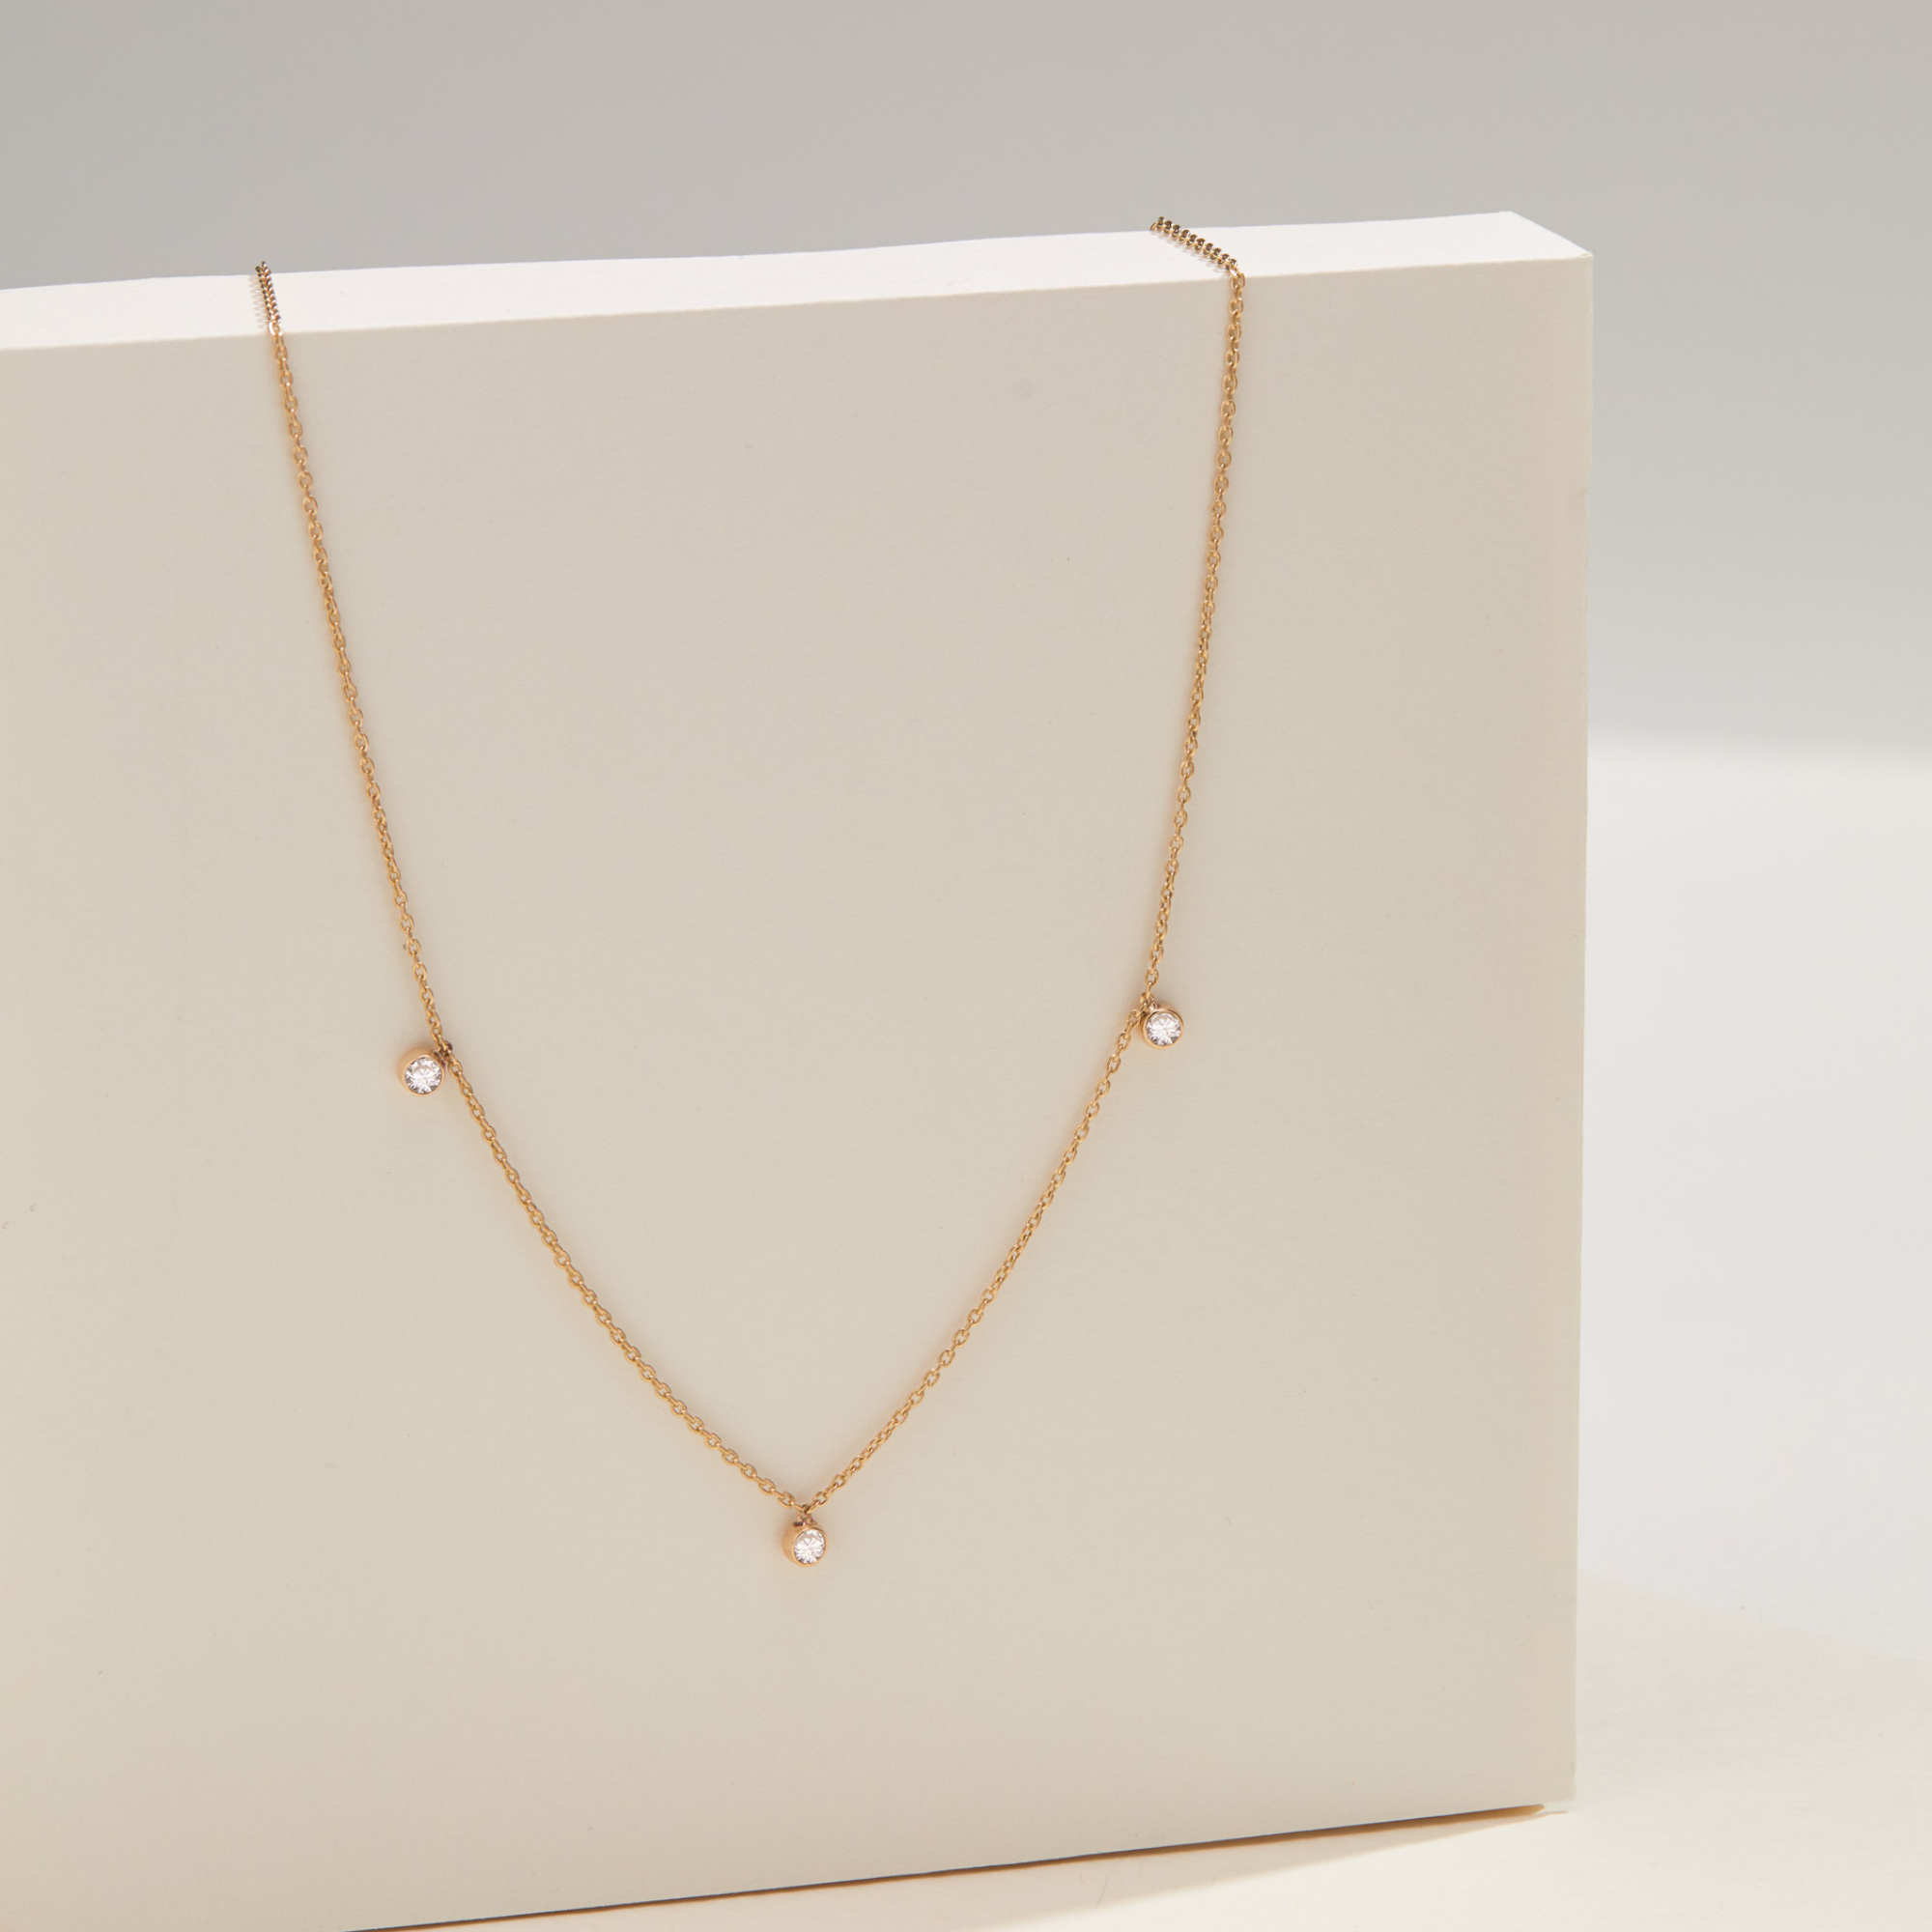 Solid gold diamond drop necklace hanging over a solid white block